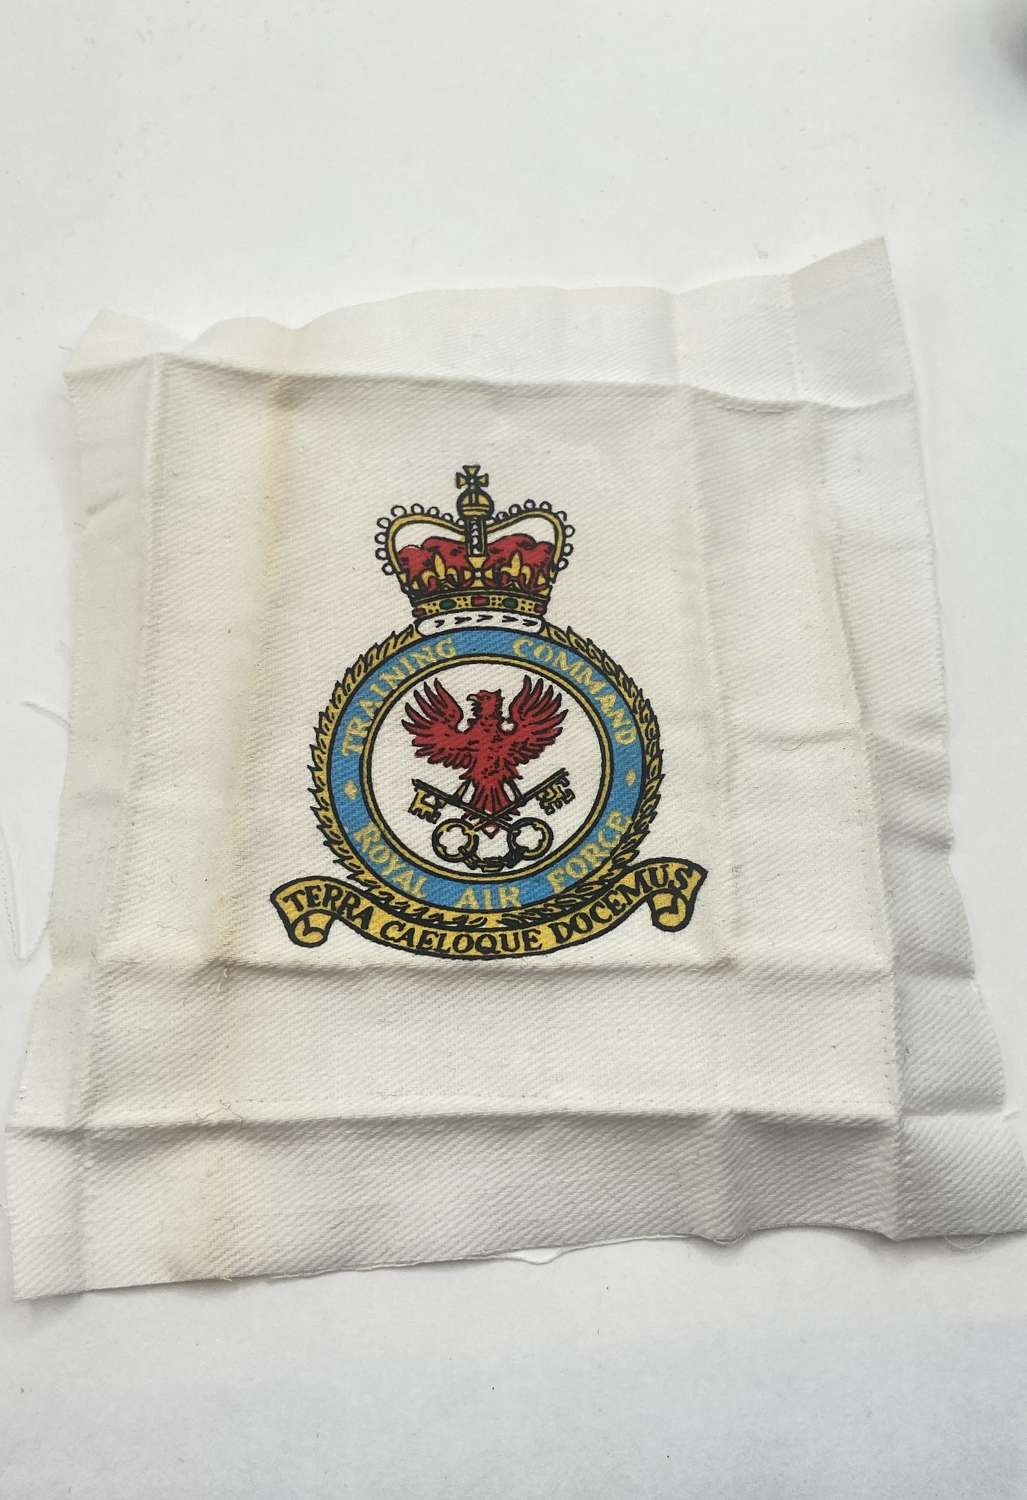 Post WW2 RAF Royal Air Force Training Command Printed Patch